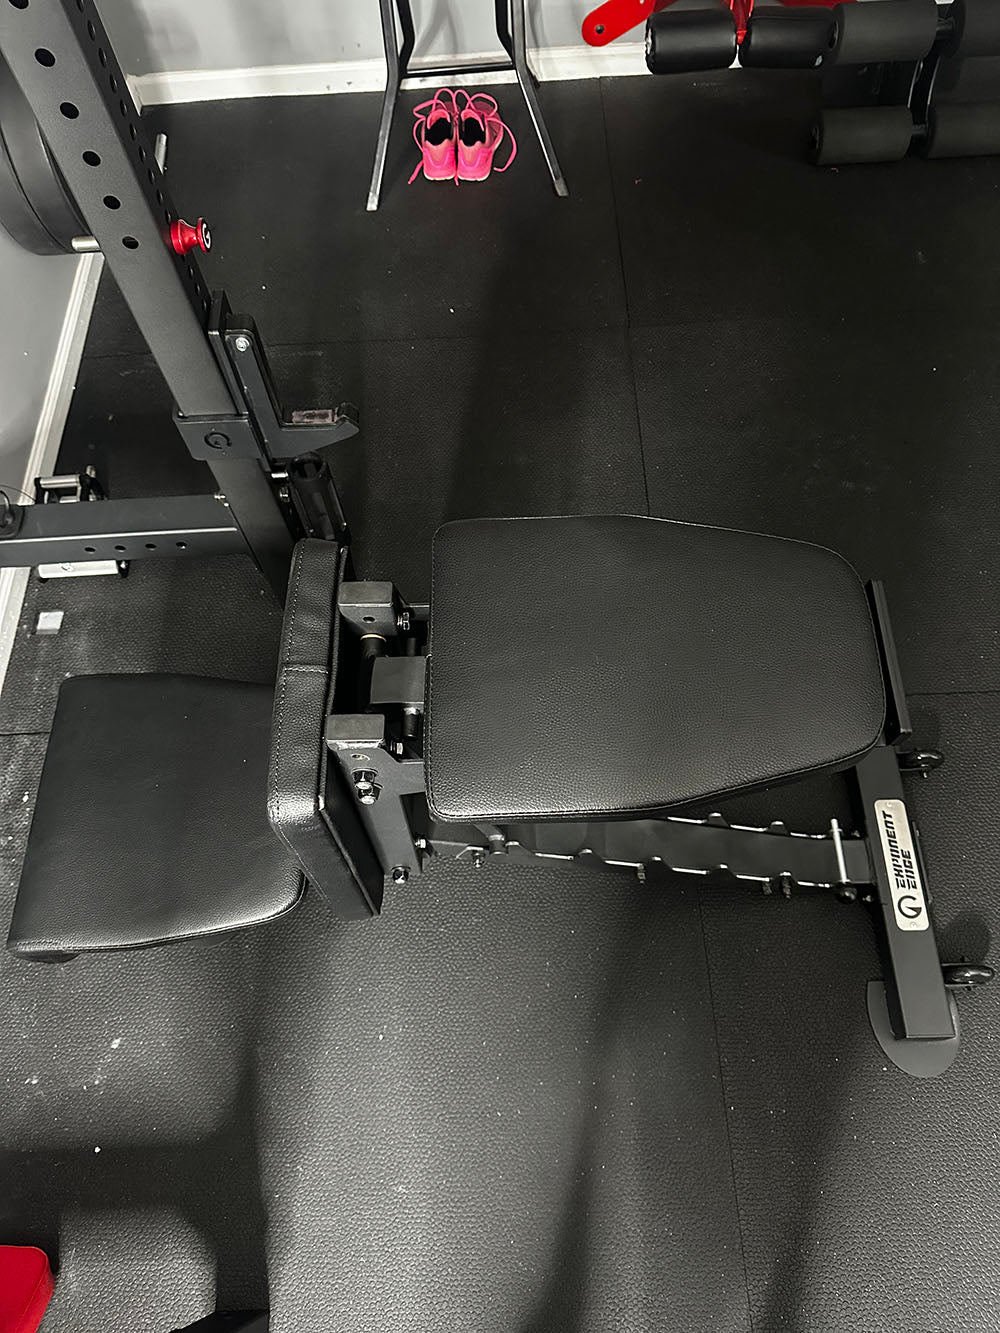 The Edge Infinity Bench is a bench that combines three separate benches all into one bench. You get the benefits of a flat bench, incline bench, and half bench all in one device. This image presents the bench from a top view.